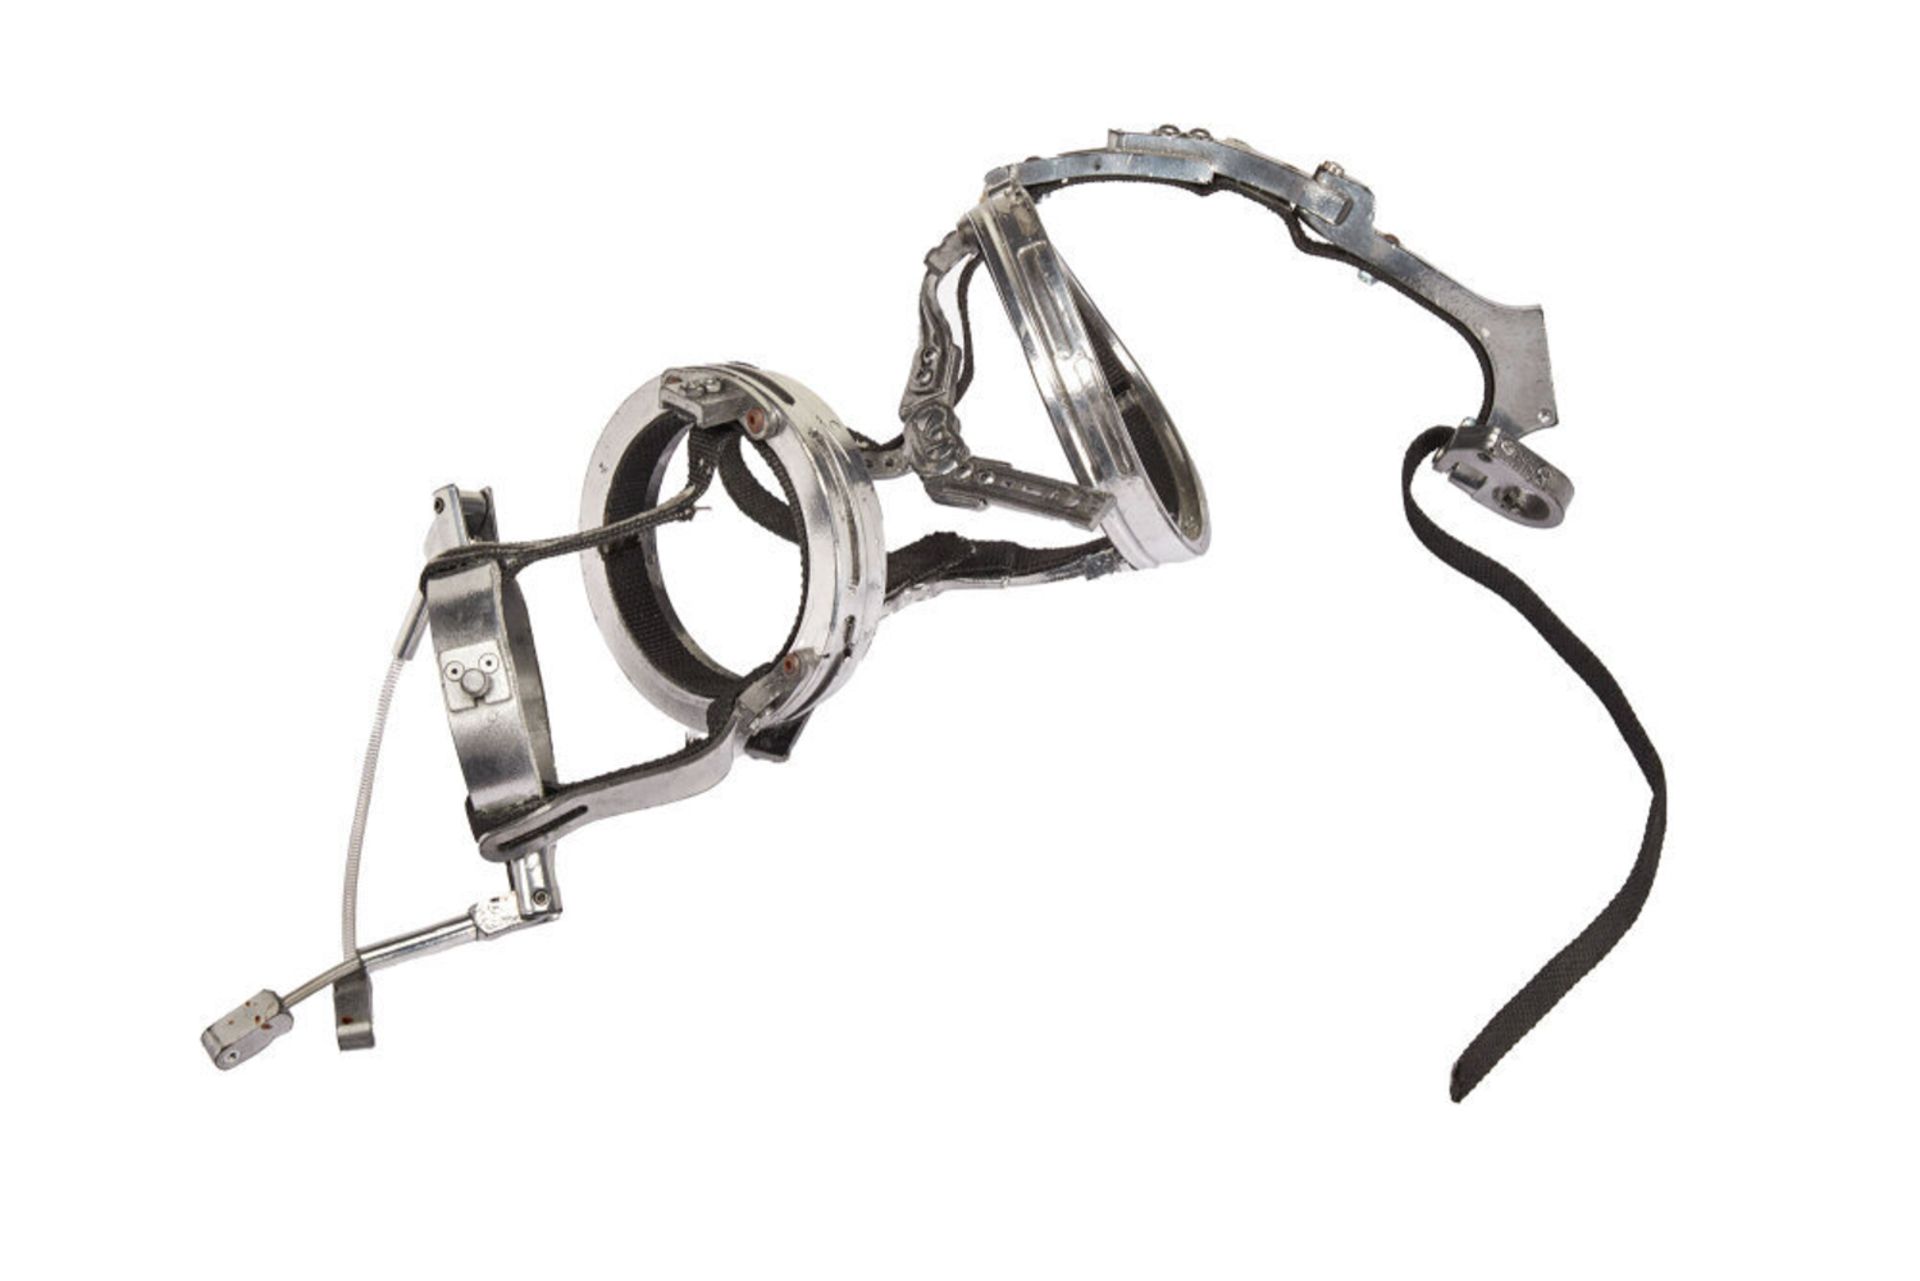 IRON MAN 2 | MICKEY ROURKE "WHIPLASH / IVAN VANKO" ELECTRIC WHIP ARM BRACE PROPS (WITH DVD) - Image 2 of 11